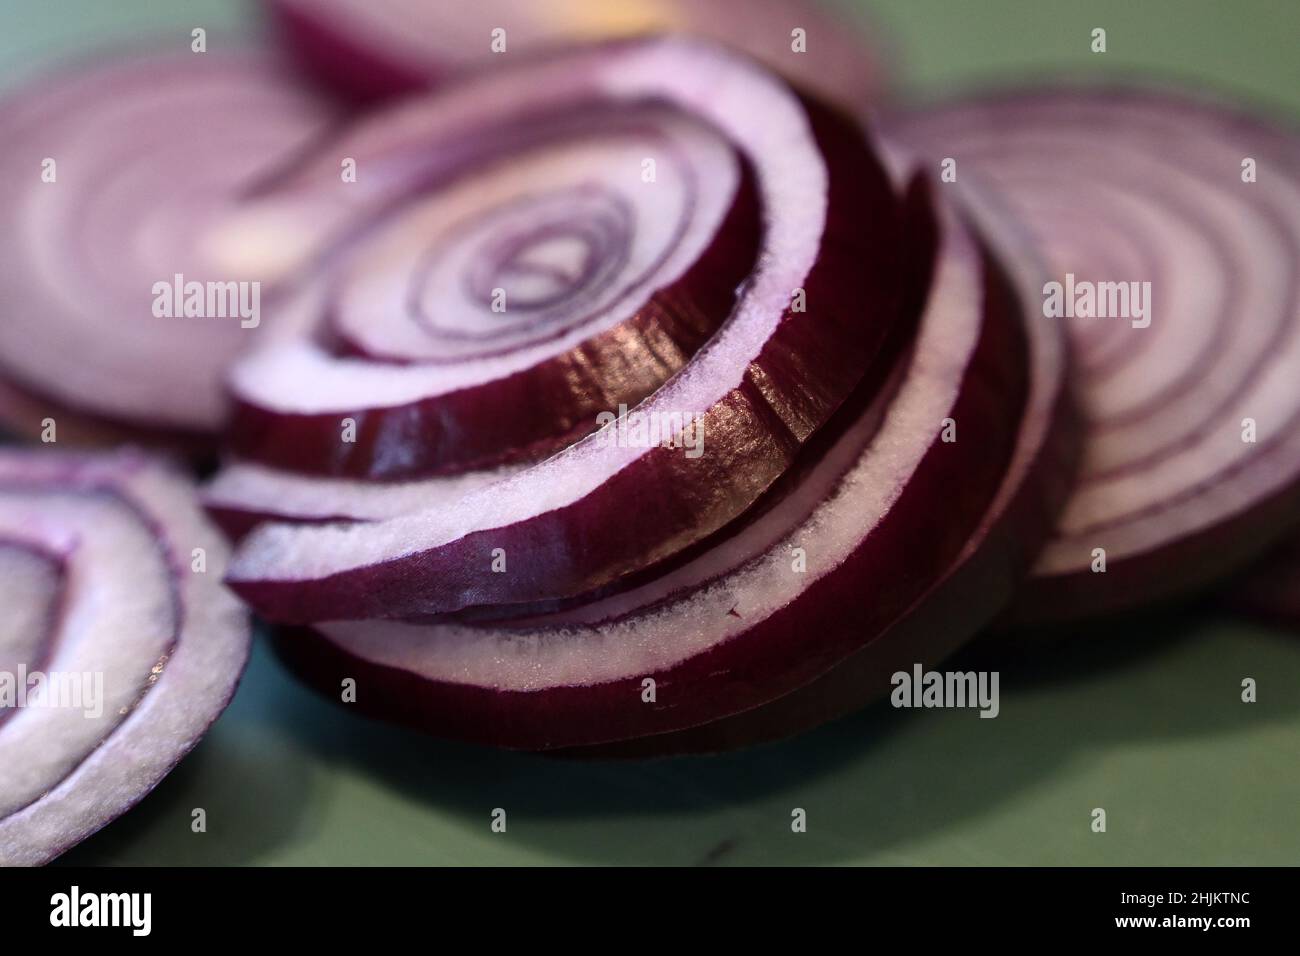 sliced red onions, great cooking ingredients Stock Photo